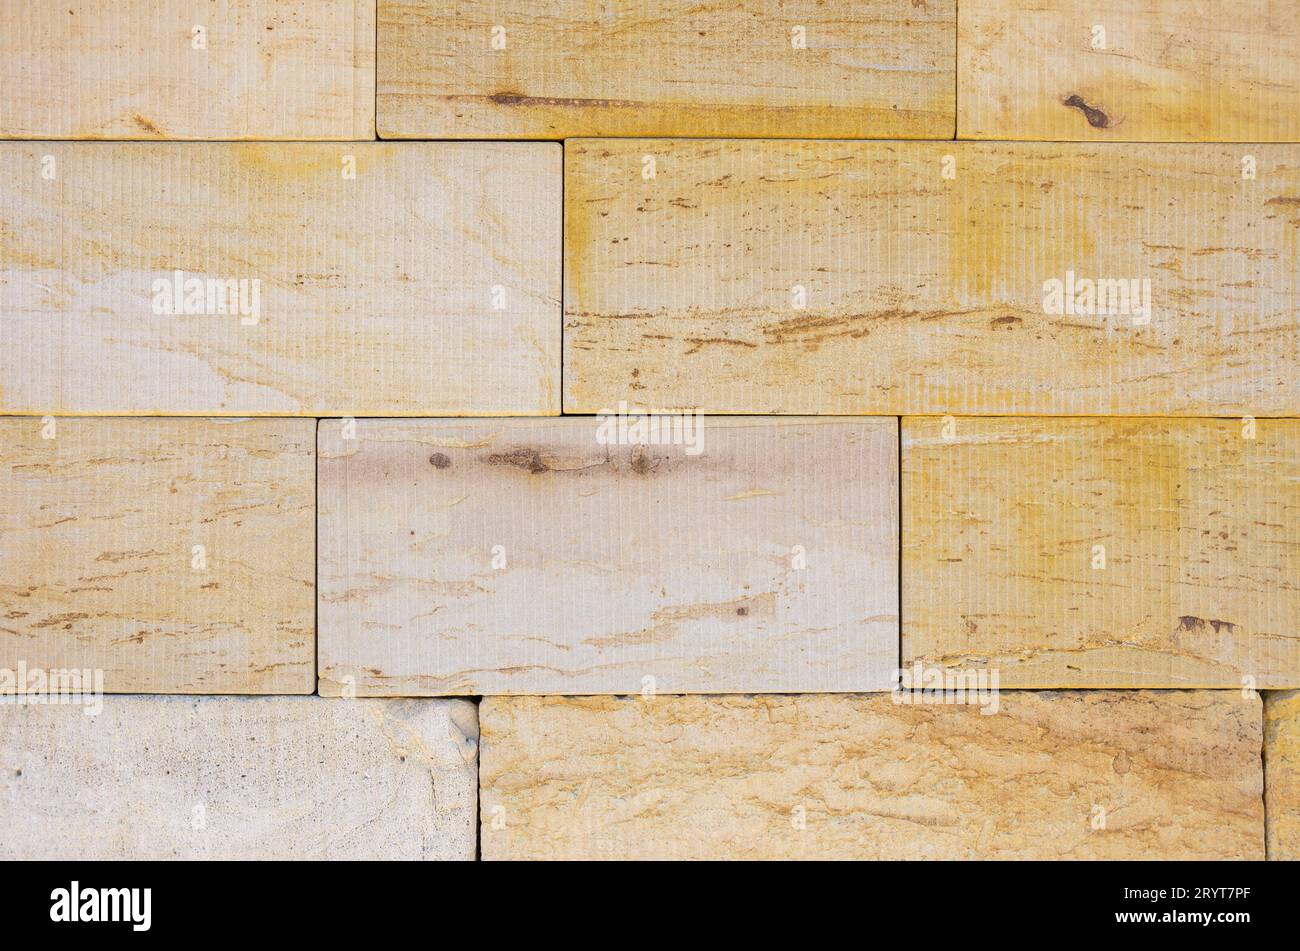 Background and pattern of rectangular shaped slabs of yellow sandstone. Stock Photo